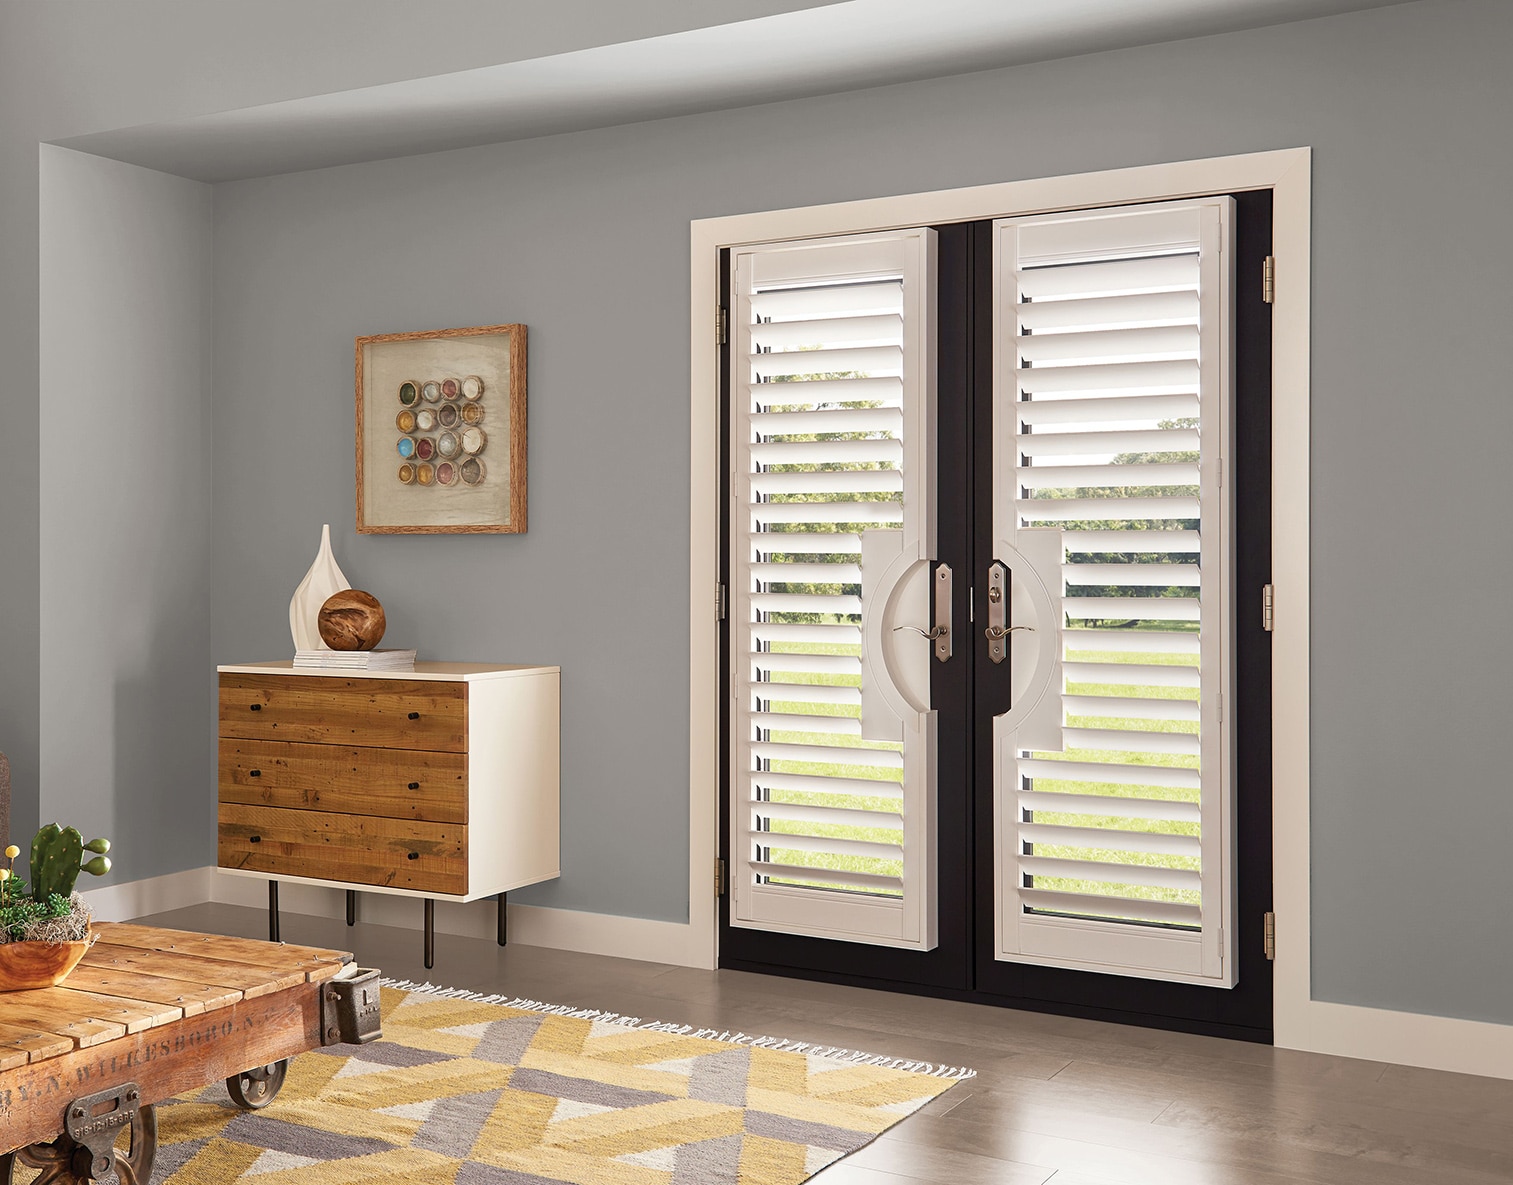 blinds for french doors lowes